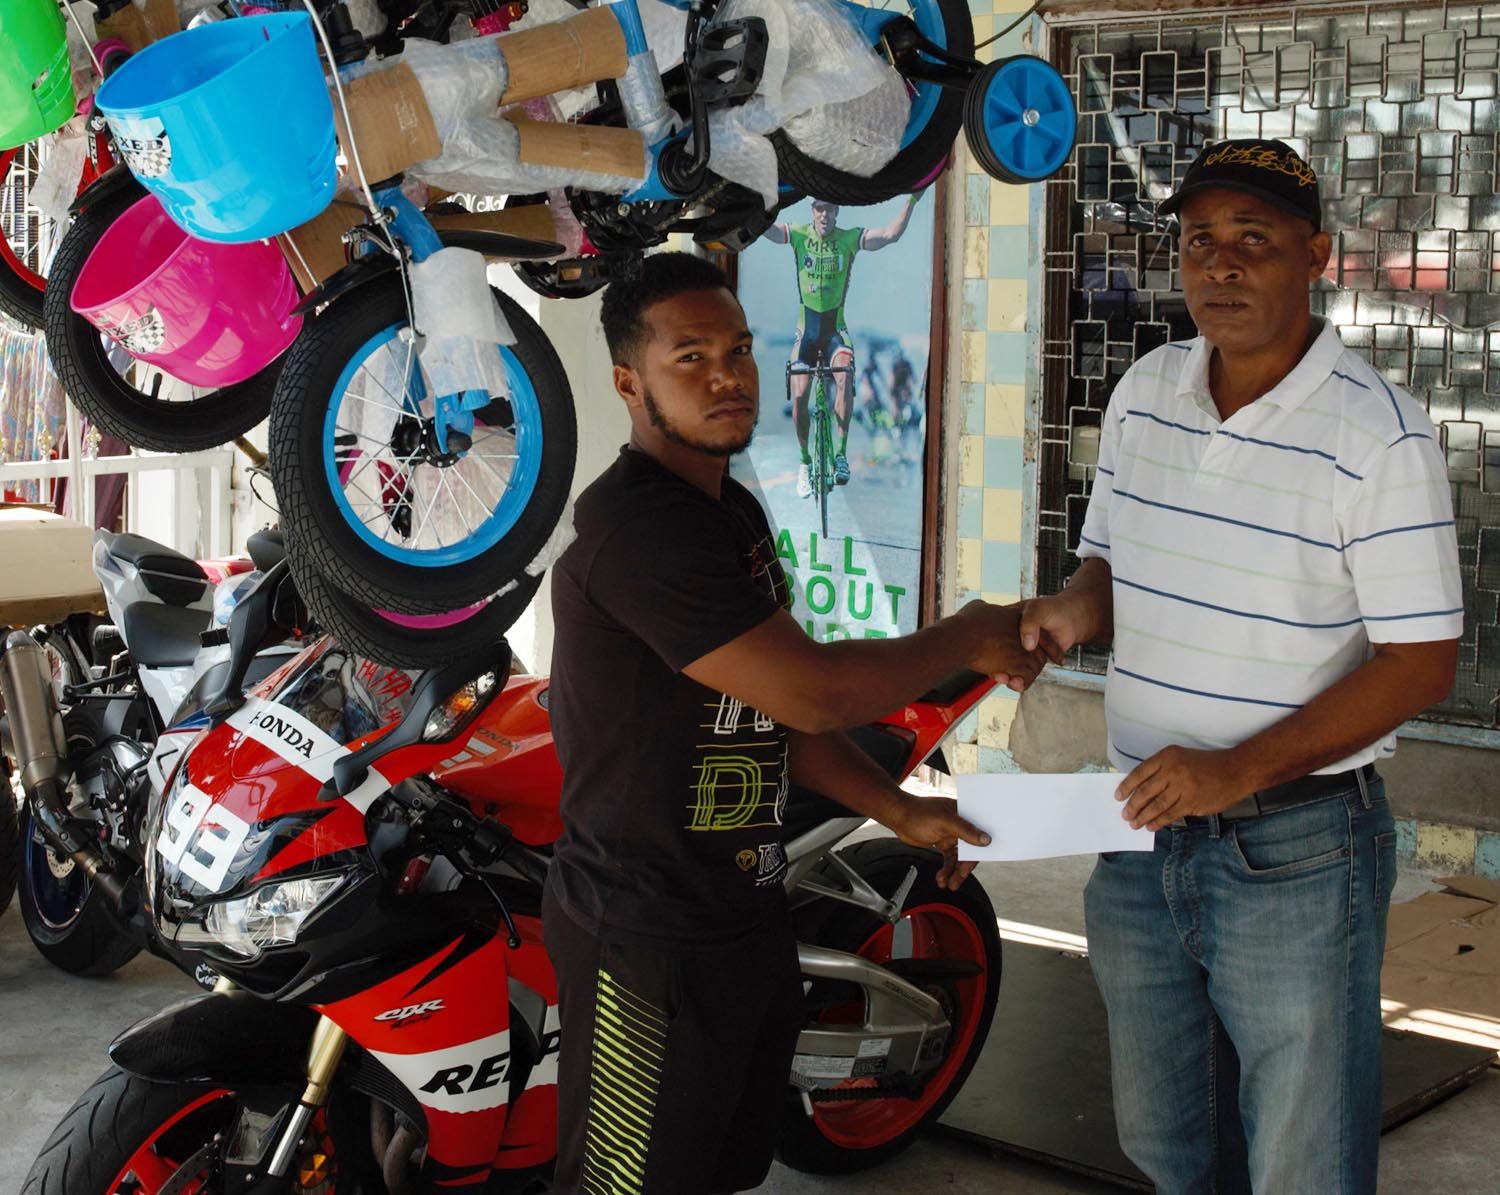 Three Peat Promotions Rawle Welch (right) collecting the sponsorship cheque from Jamal Bentley of the Bike Shop at the entity’s Robb Street location